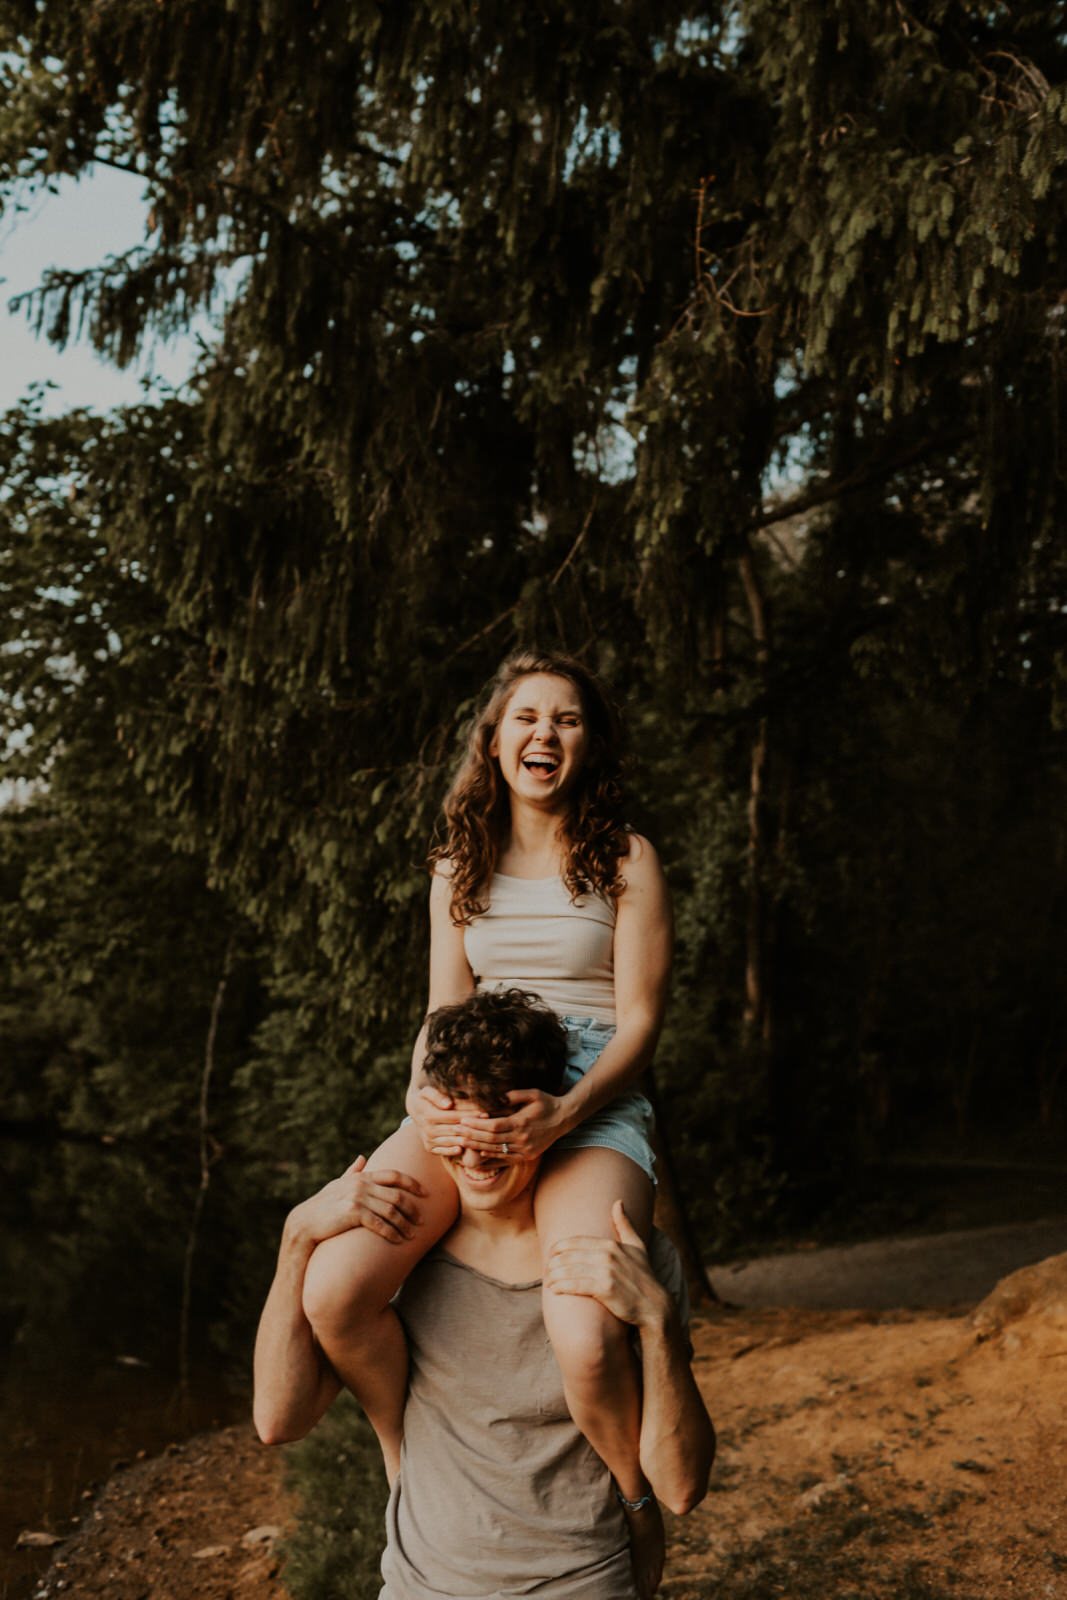 The Sweetest Engagement Shoot by Karlee Rose Photo